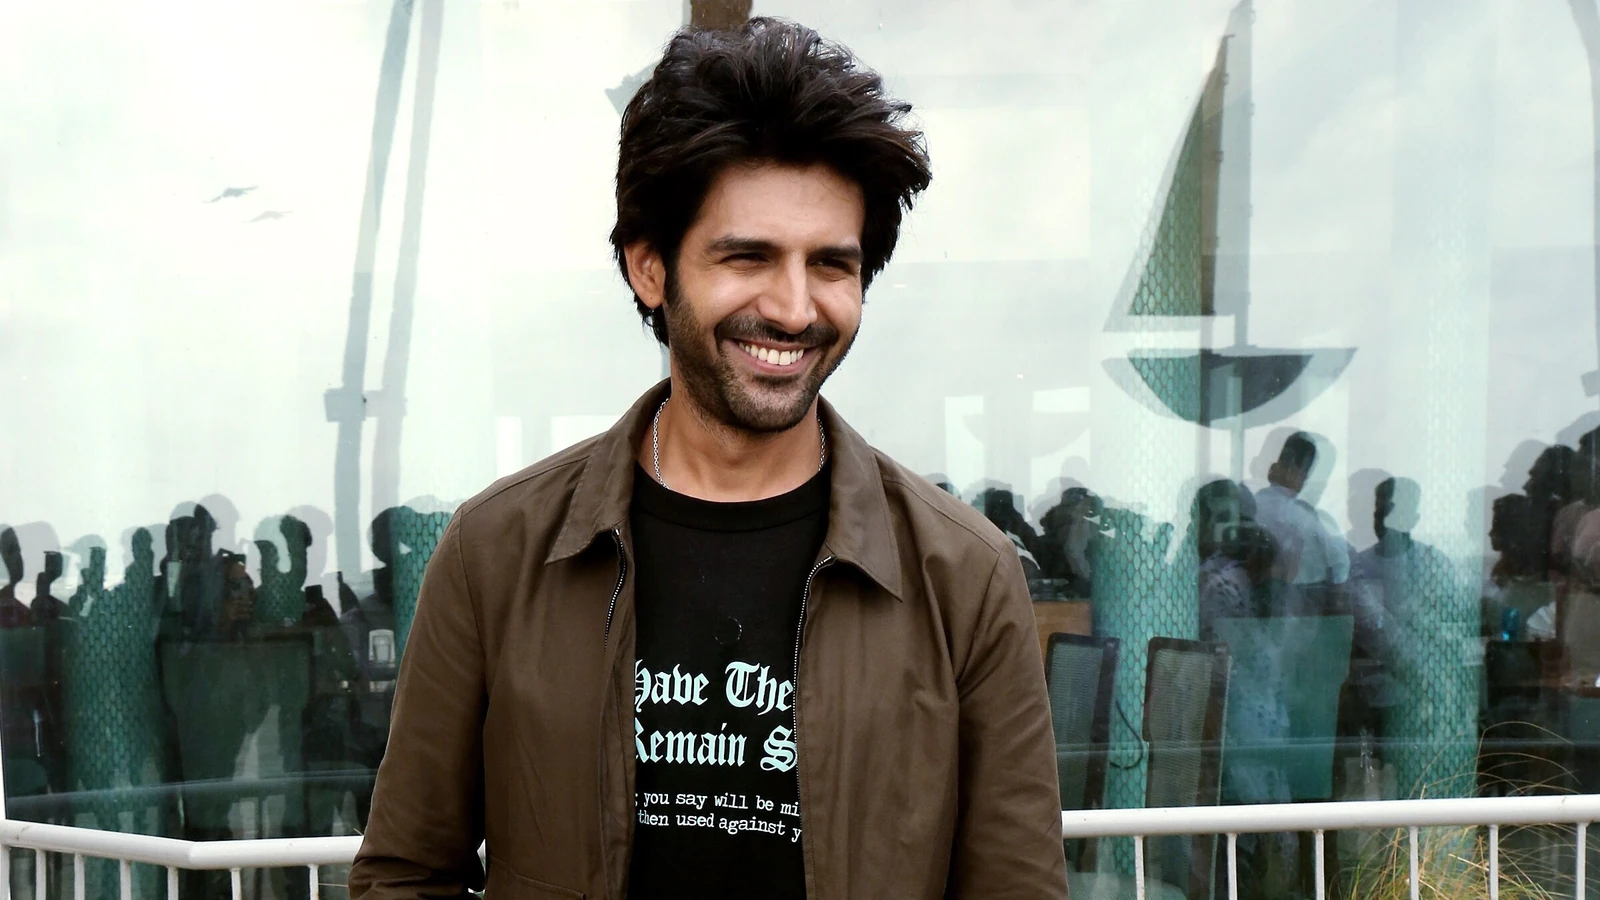 Kartik Aaryan says a girl once stalked his mother to be her ‘bahu’, was ready to do ‘jhaadu pocha’ too